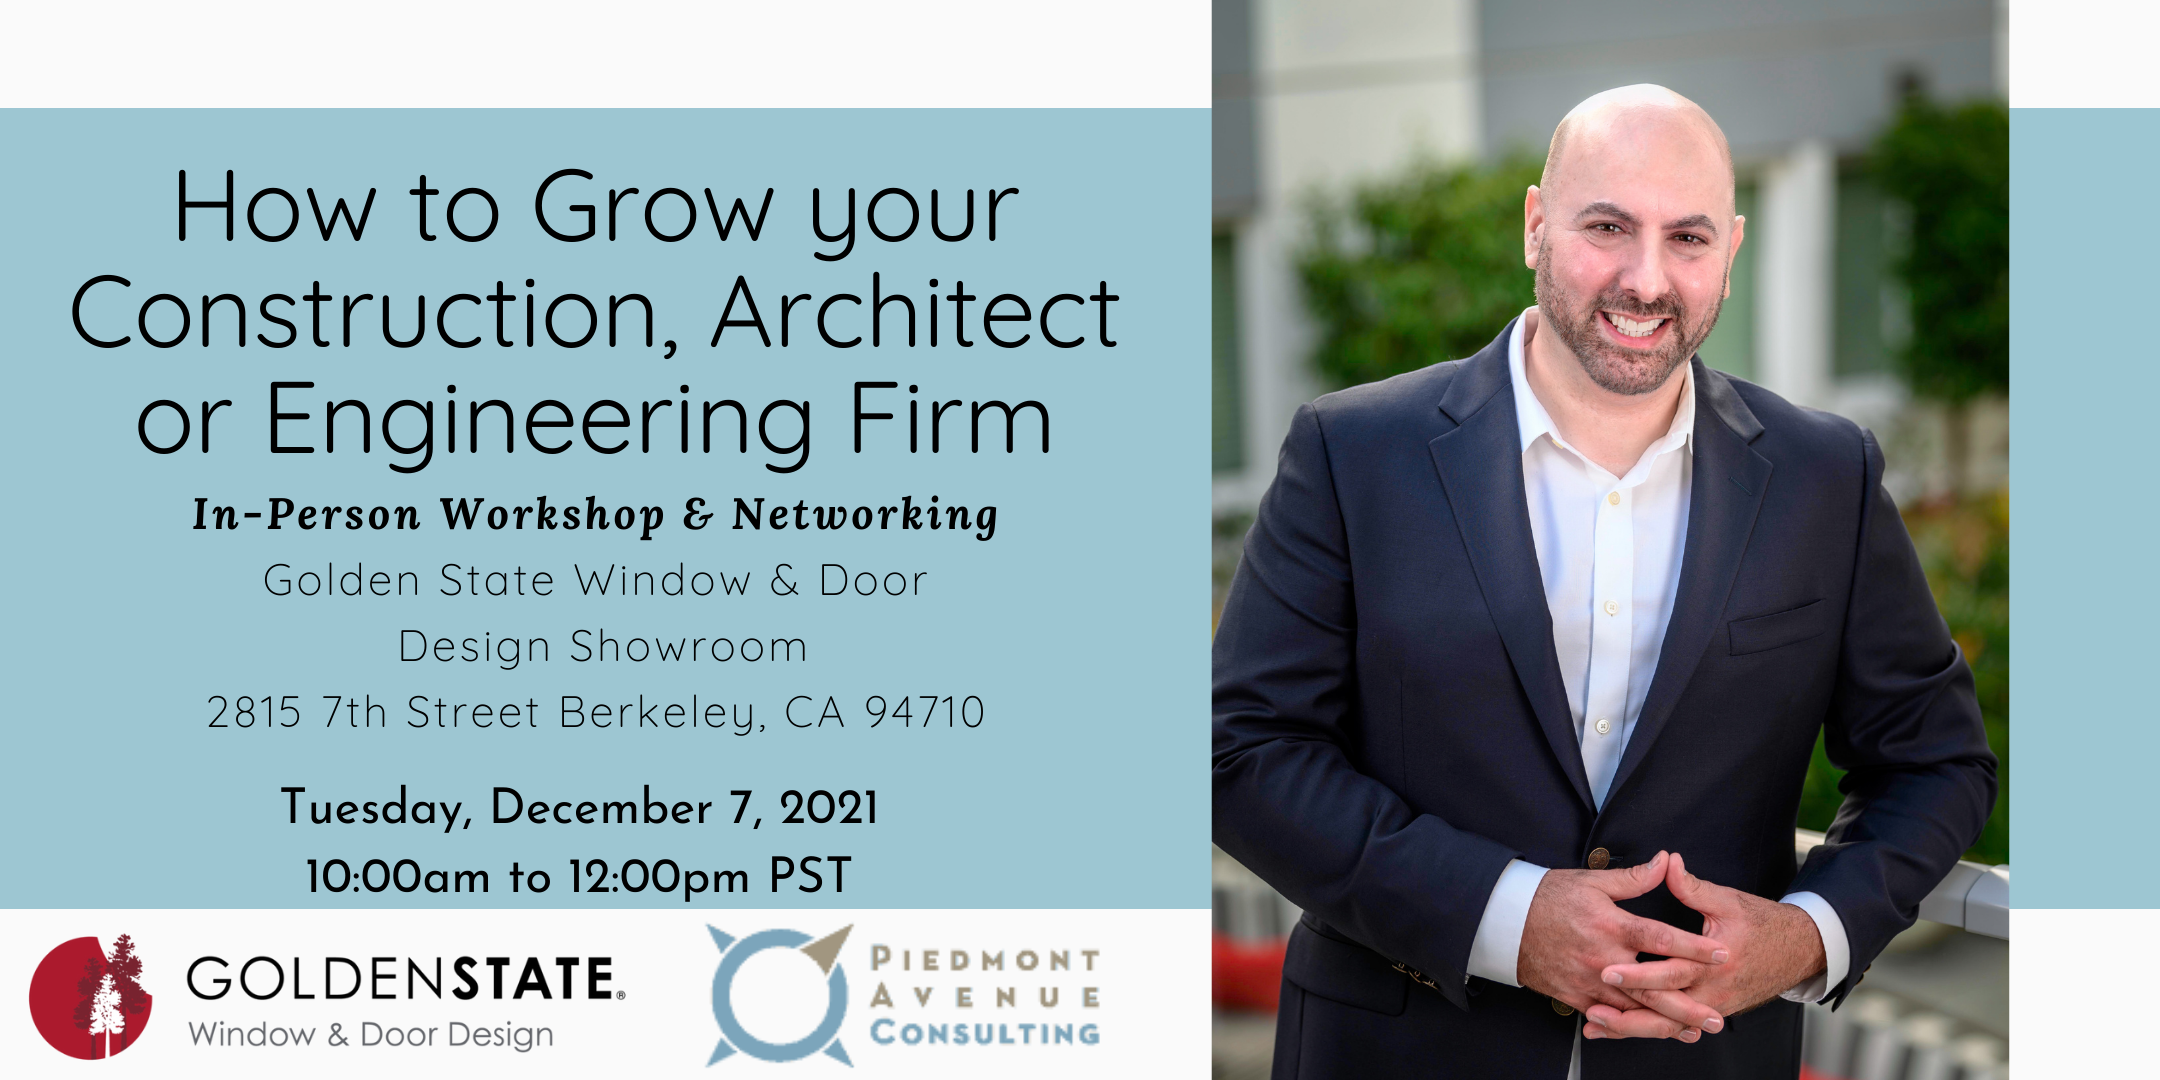 Live Workshop|How to Grow Your Construction, Architect or Engineering Firm